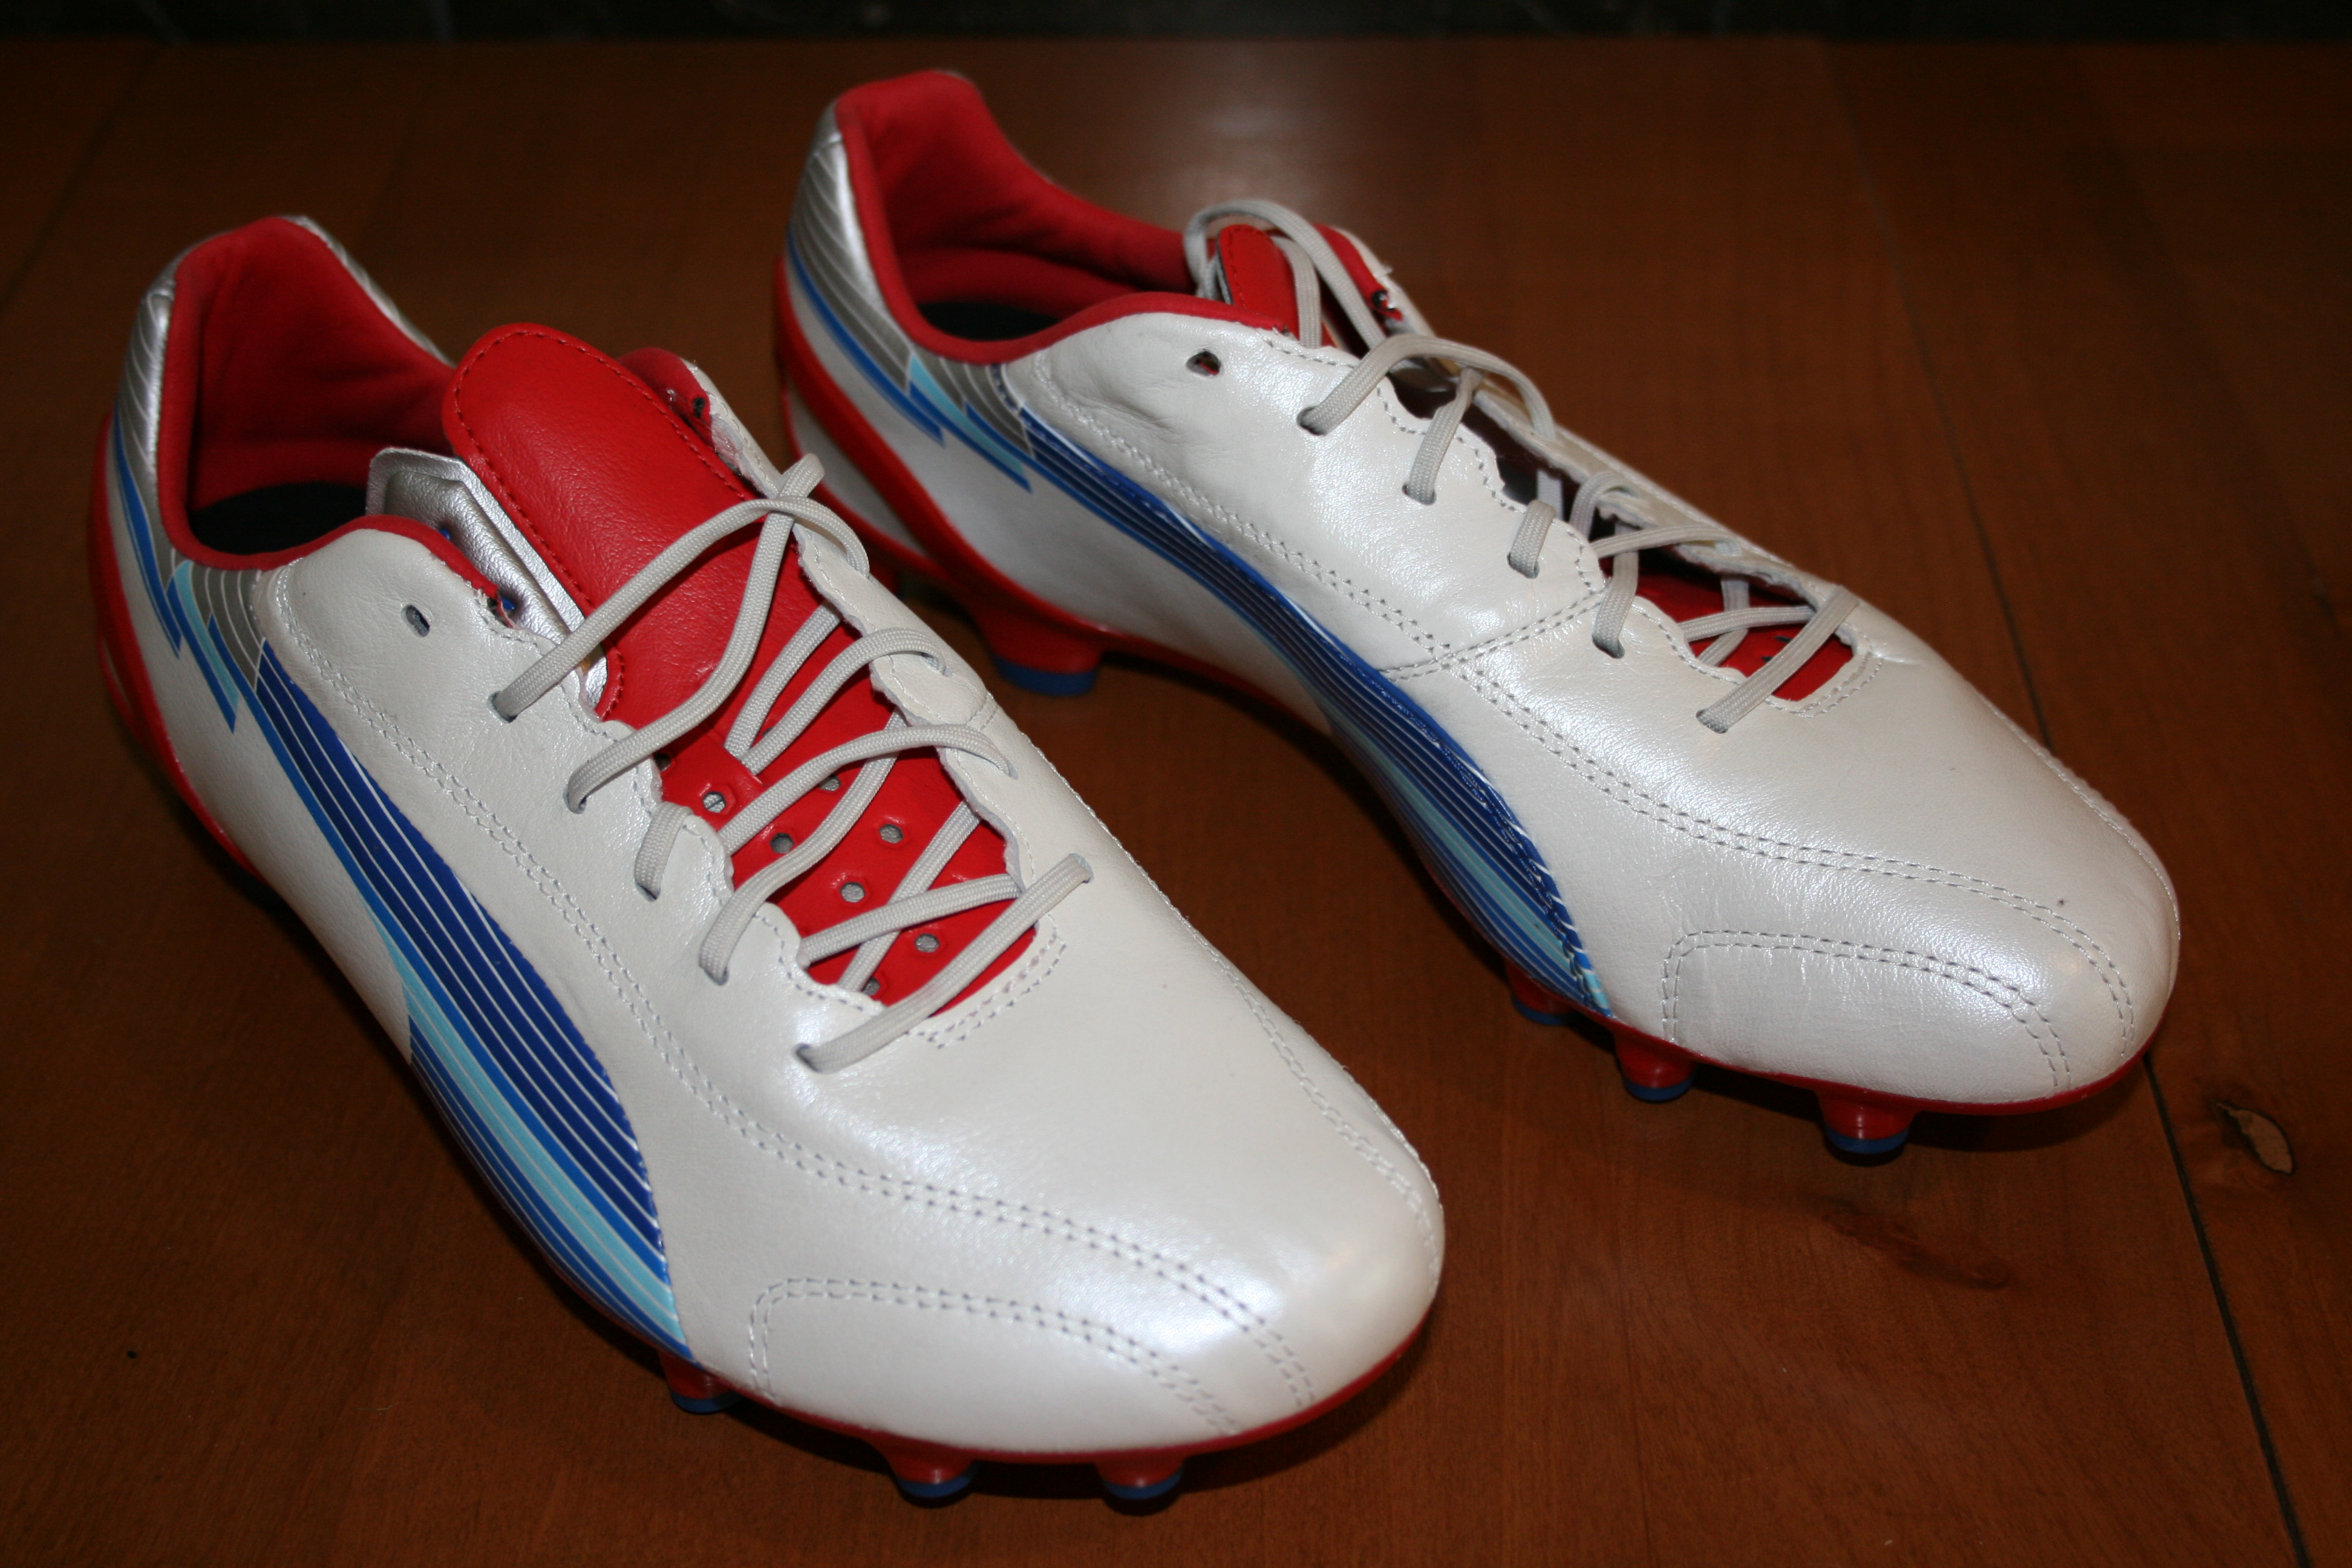 Elite Cleat Reviews » Just In: PUMA evoSPEED 1 K FG – White/Limoges ...